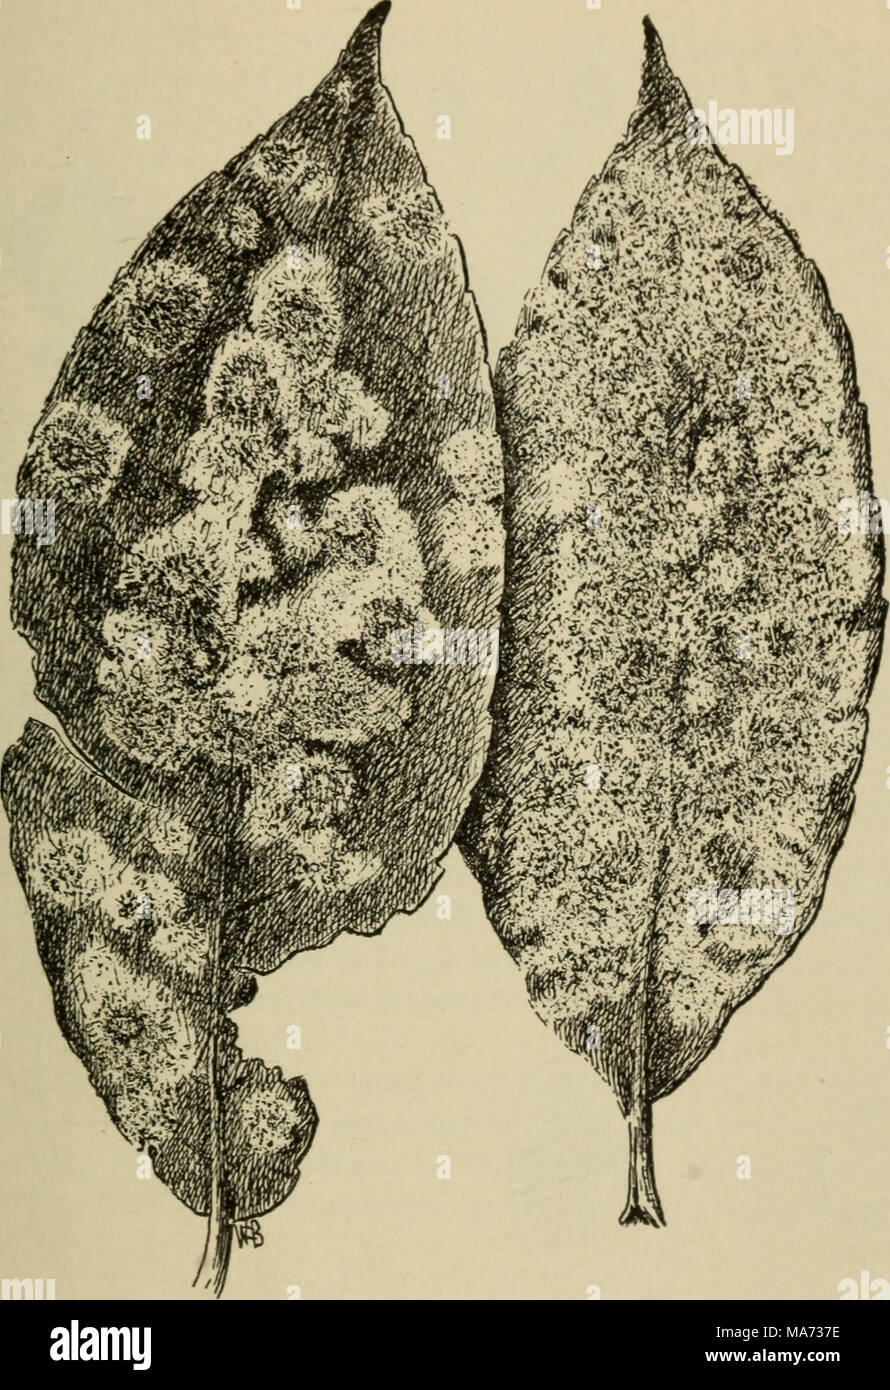 . Elementary botany . Fig. 164. Leaves of willow showing willow mildew. The black dots are the fruit bodies (perithecia) seated on the white mycelium. press on the cover glass with a needle until we see a few of the perithecia rupture. If this is done carefully we will see several small ovate sacs issue, each containing a number of spores, as shown in fig. 166. Such a sac is an ascus, and the spores are ascospores. Stock Photo